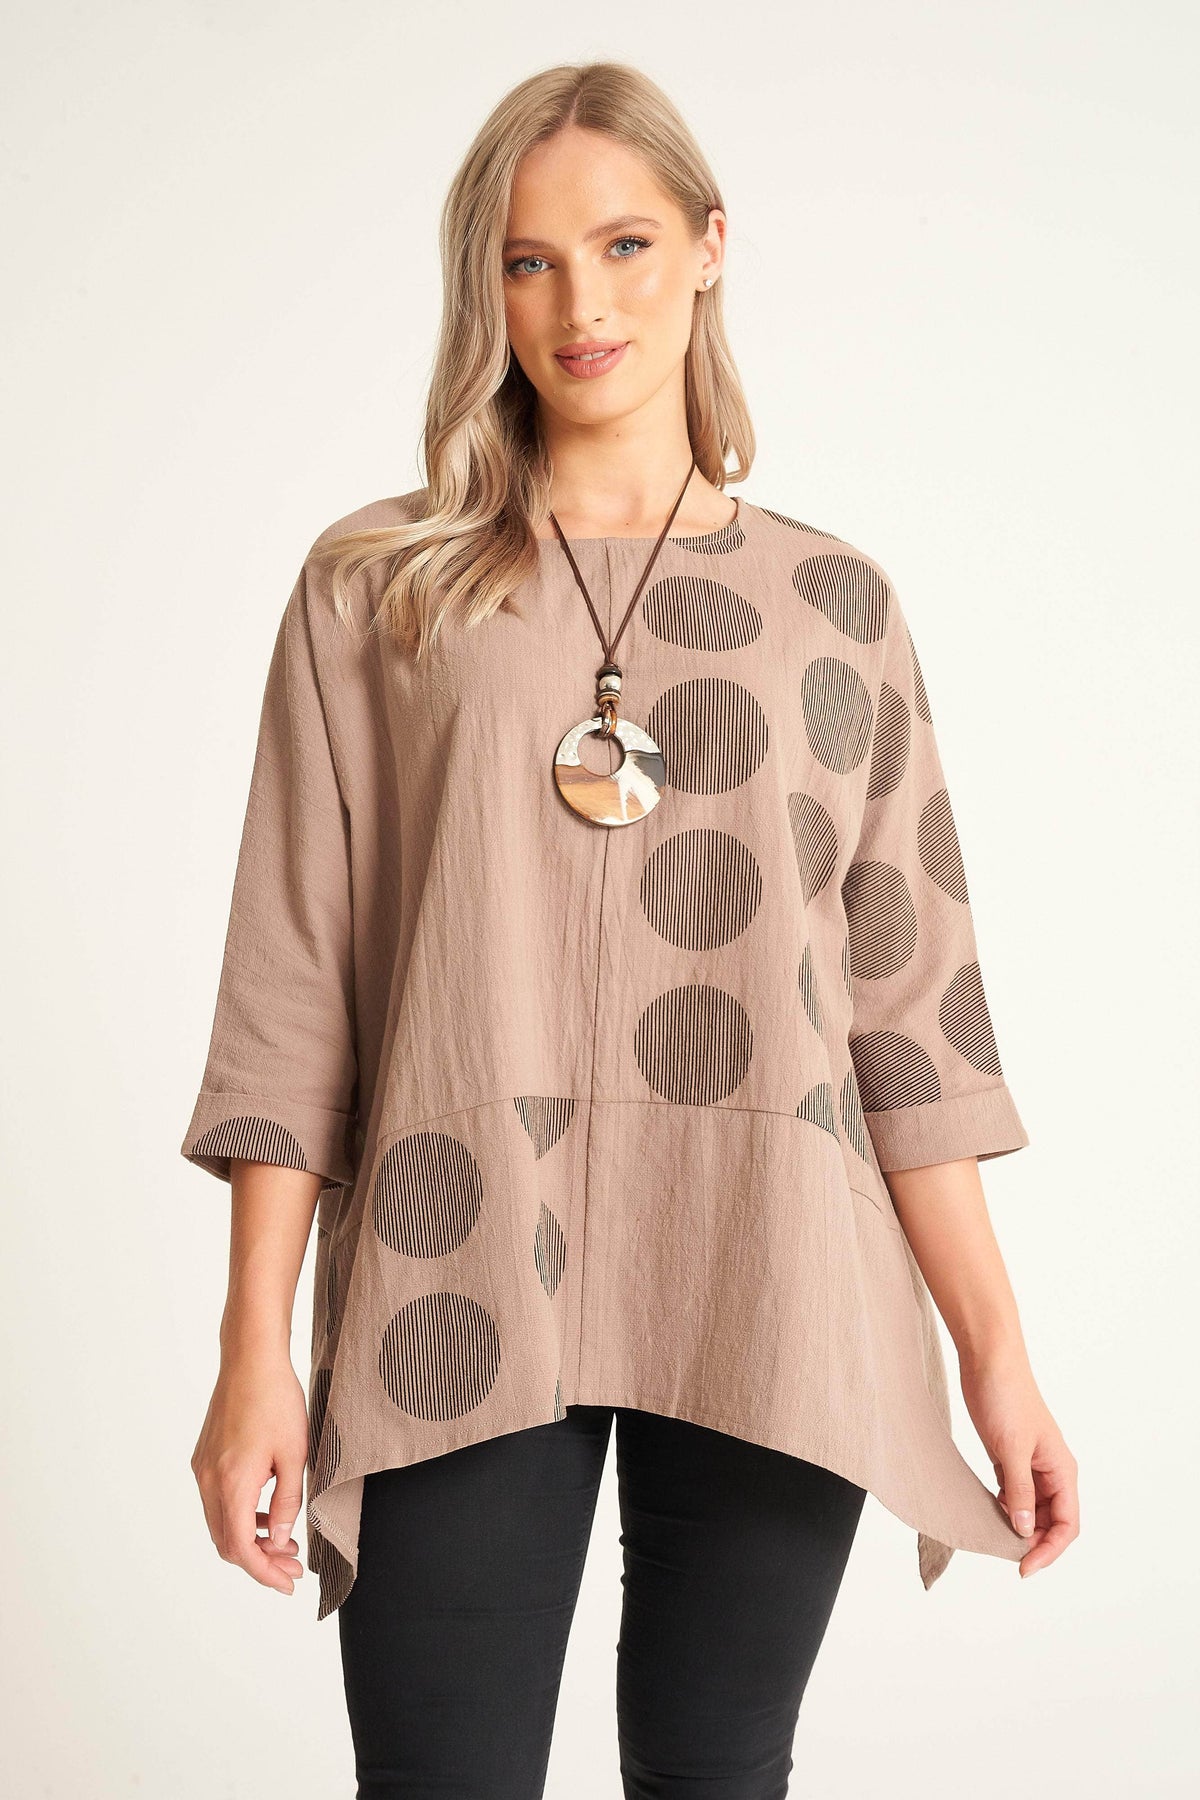 1D Top Taupe / UK: 12 - EU: 38 - US: S Cotton Loose Fit Top with Necklace